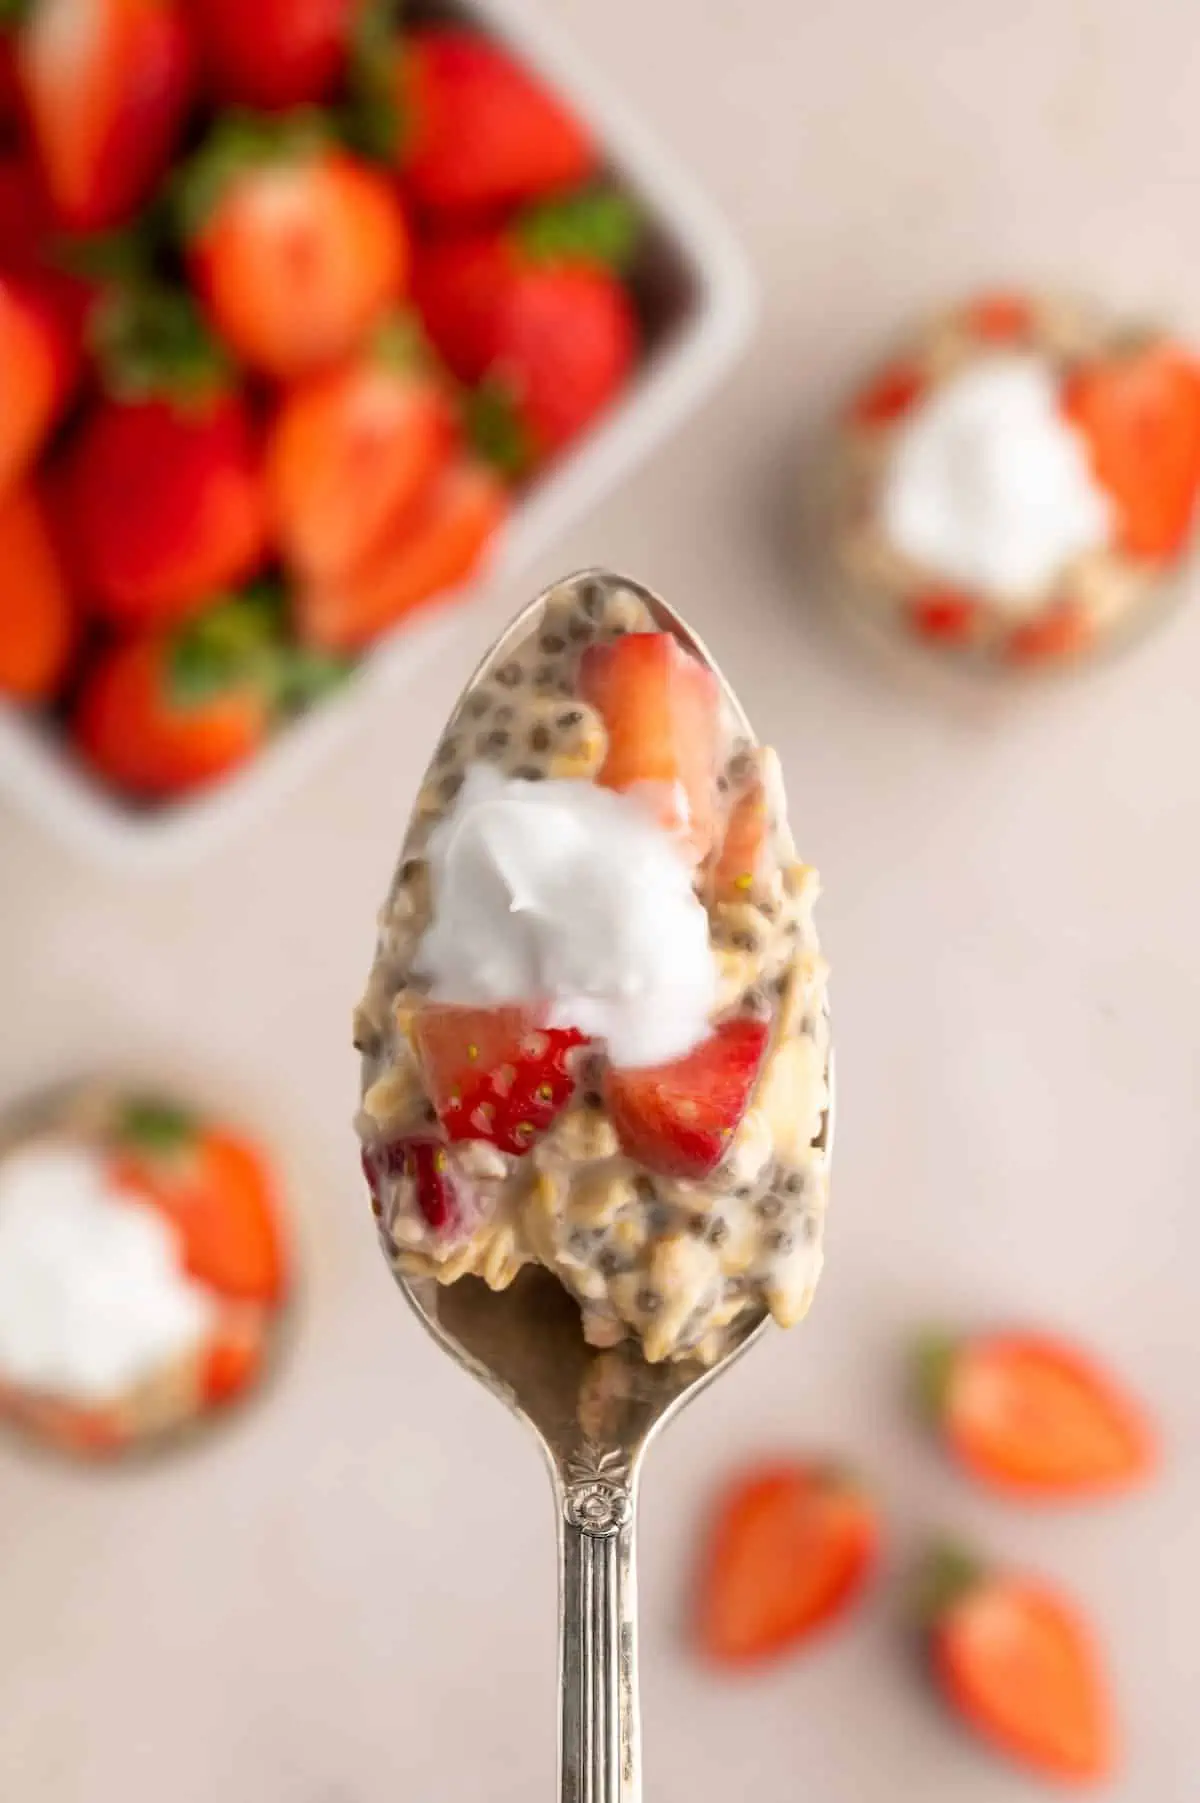 A spoonful of strawberries and cream overnight oats.